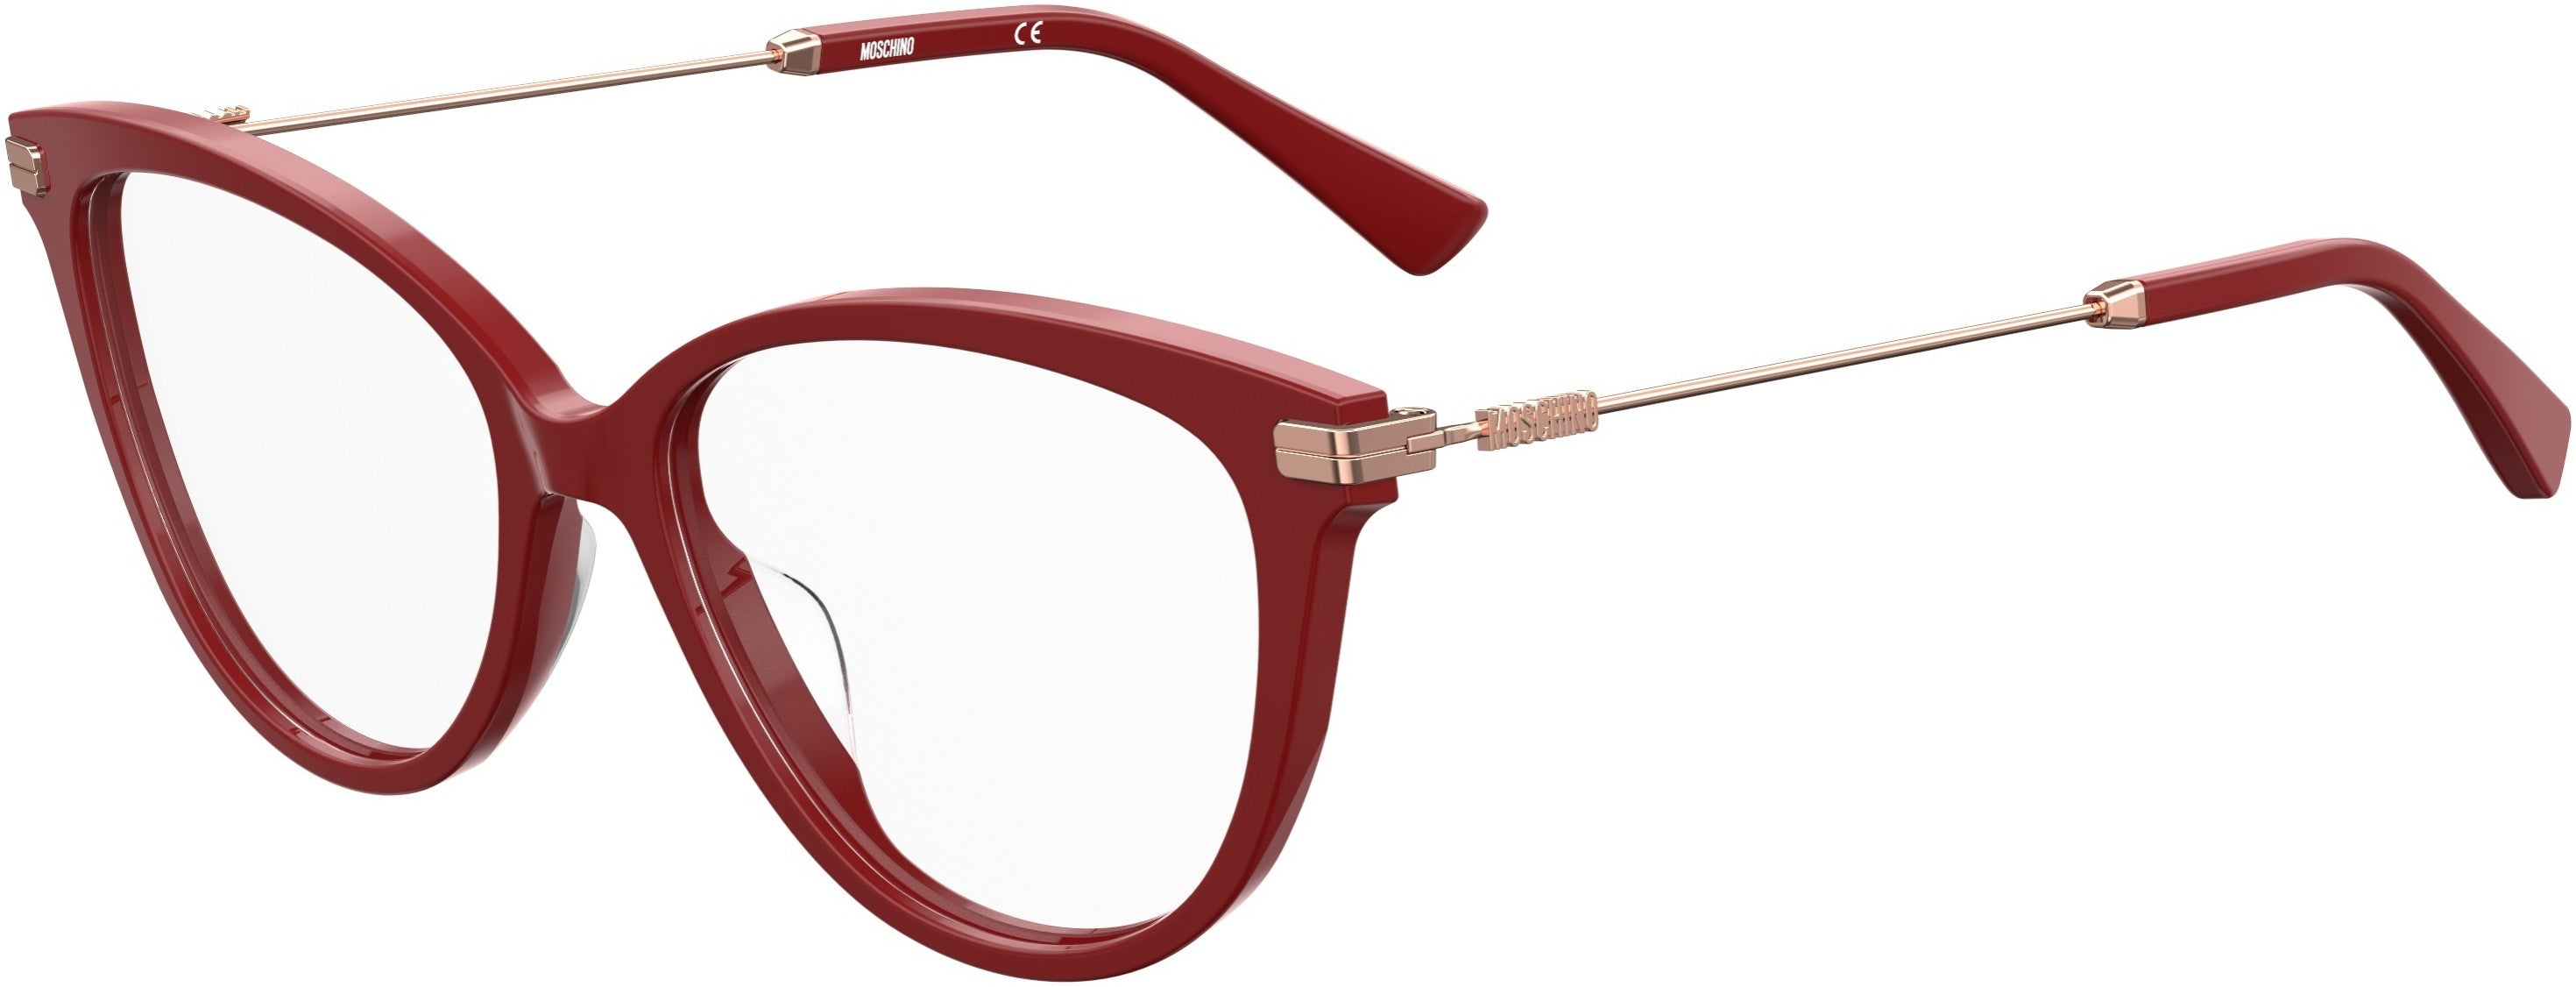  Moschino 561 Cat Eye/butterfly Eyeglasses 0C9A-0C9A  Red (00 Demo Lens)